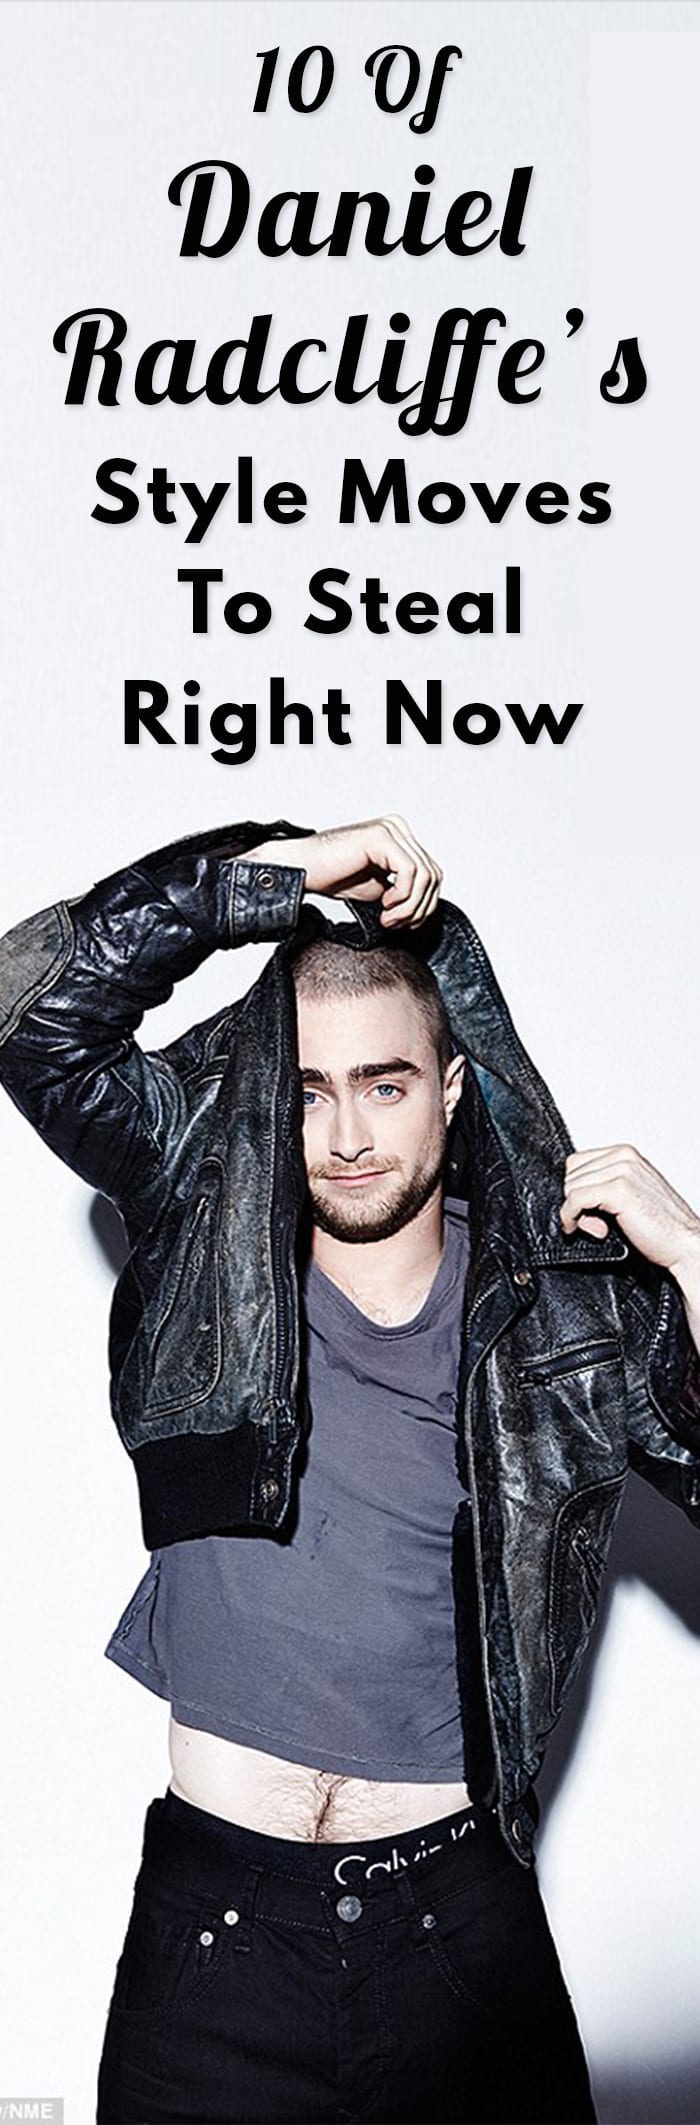 10 Of Daniel Radcliffe’s Style Moves To Steal Right Now